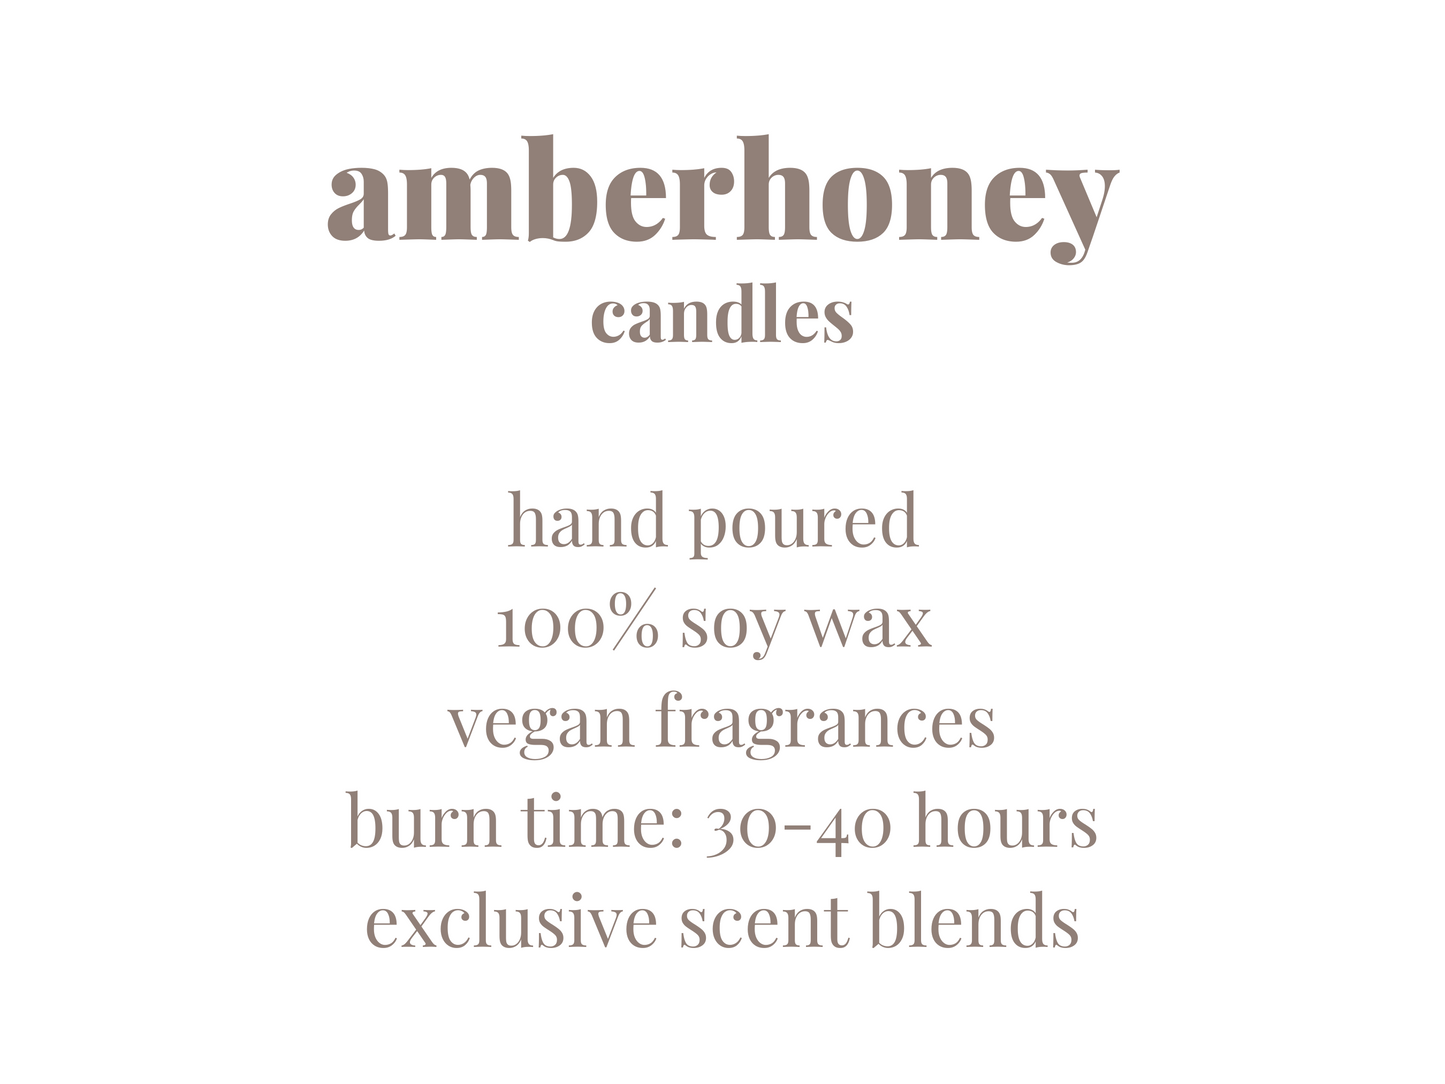 60g blackberry, bay & pomegranate soy wax travel candle